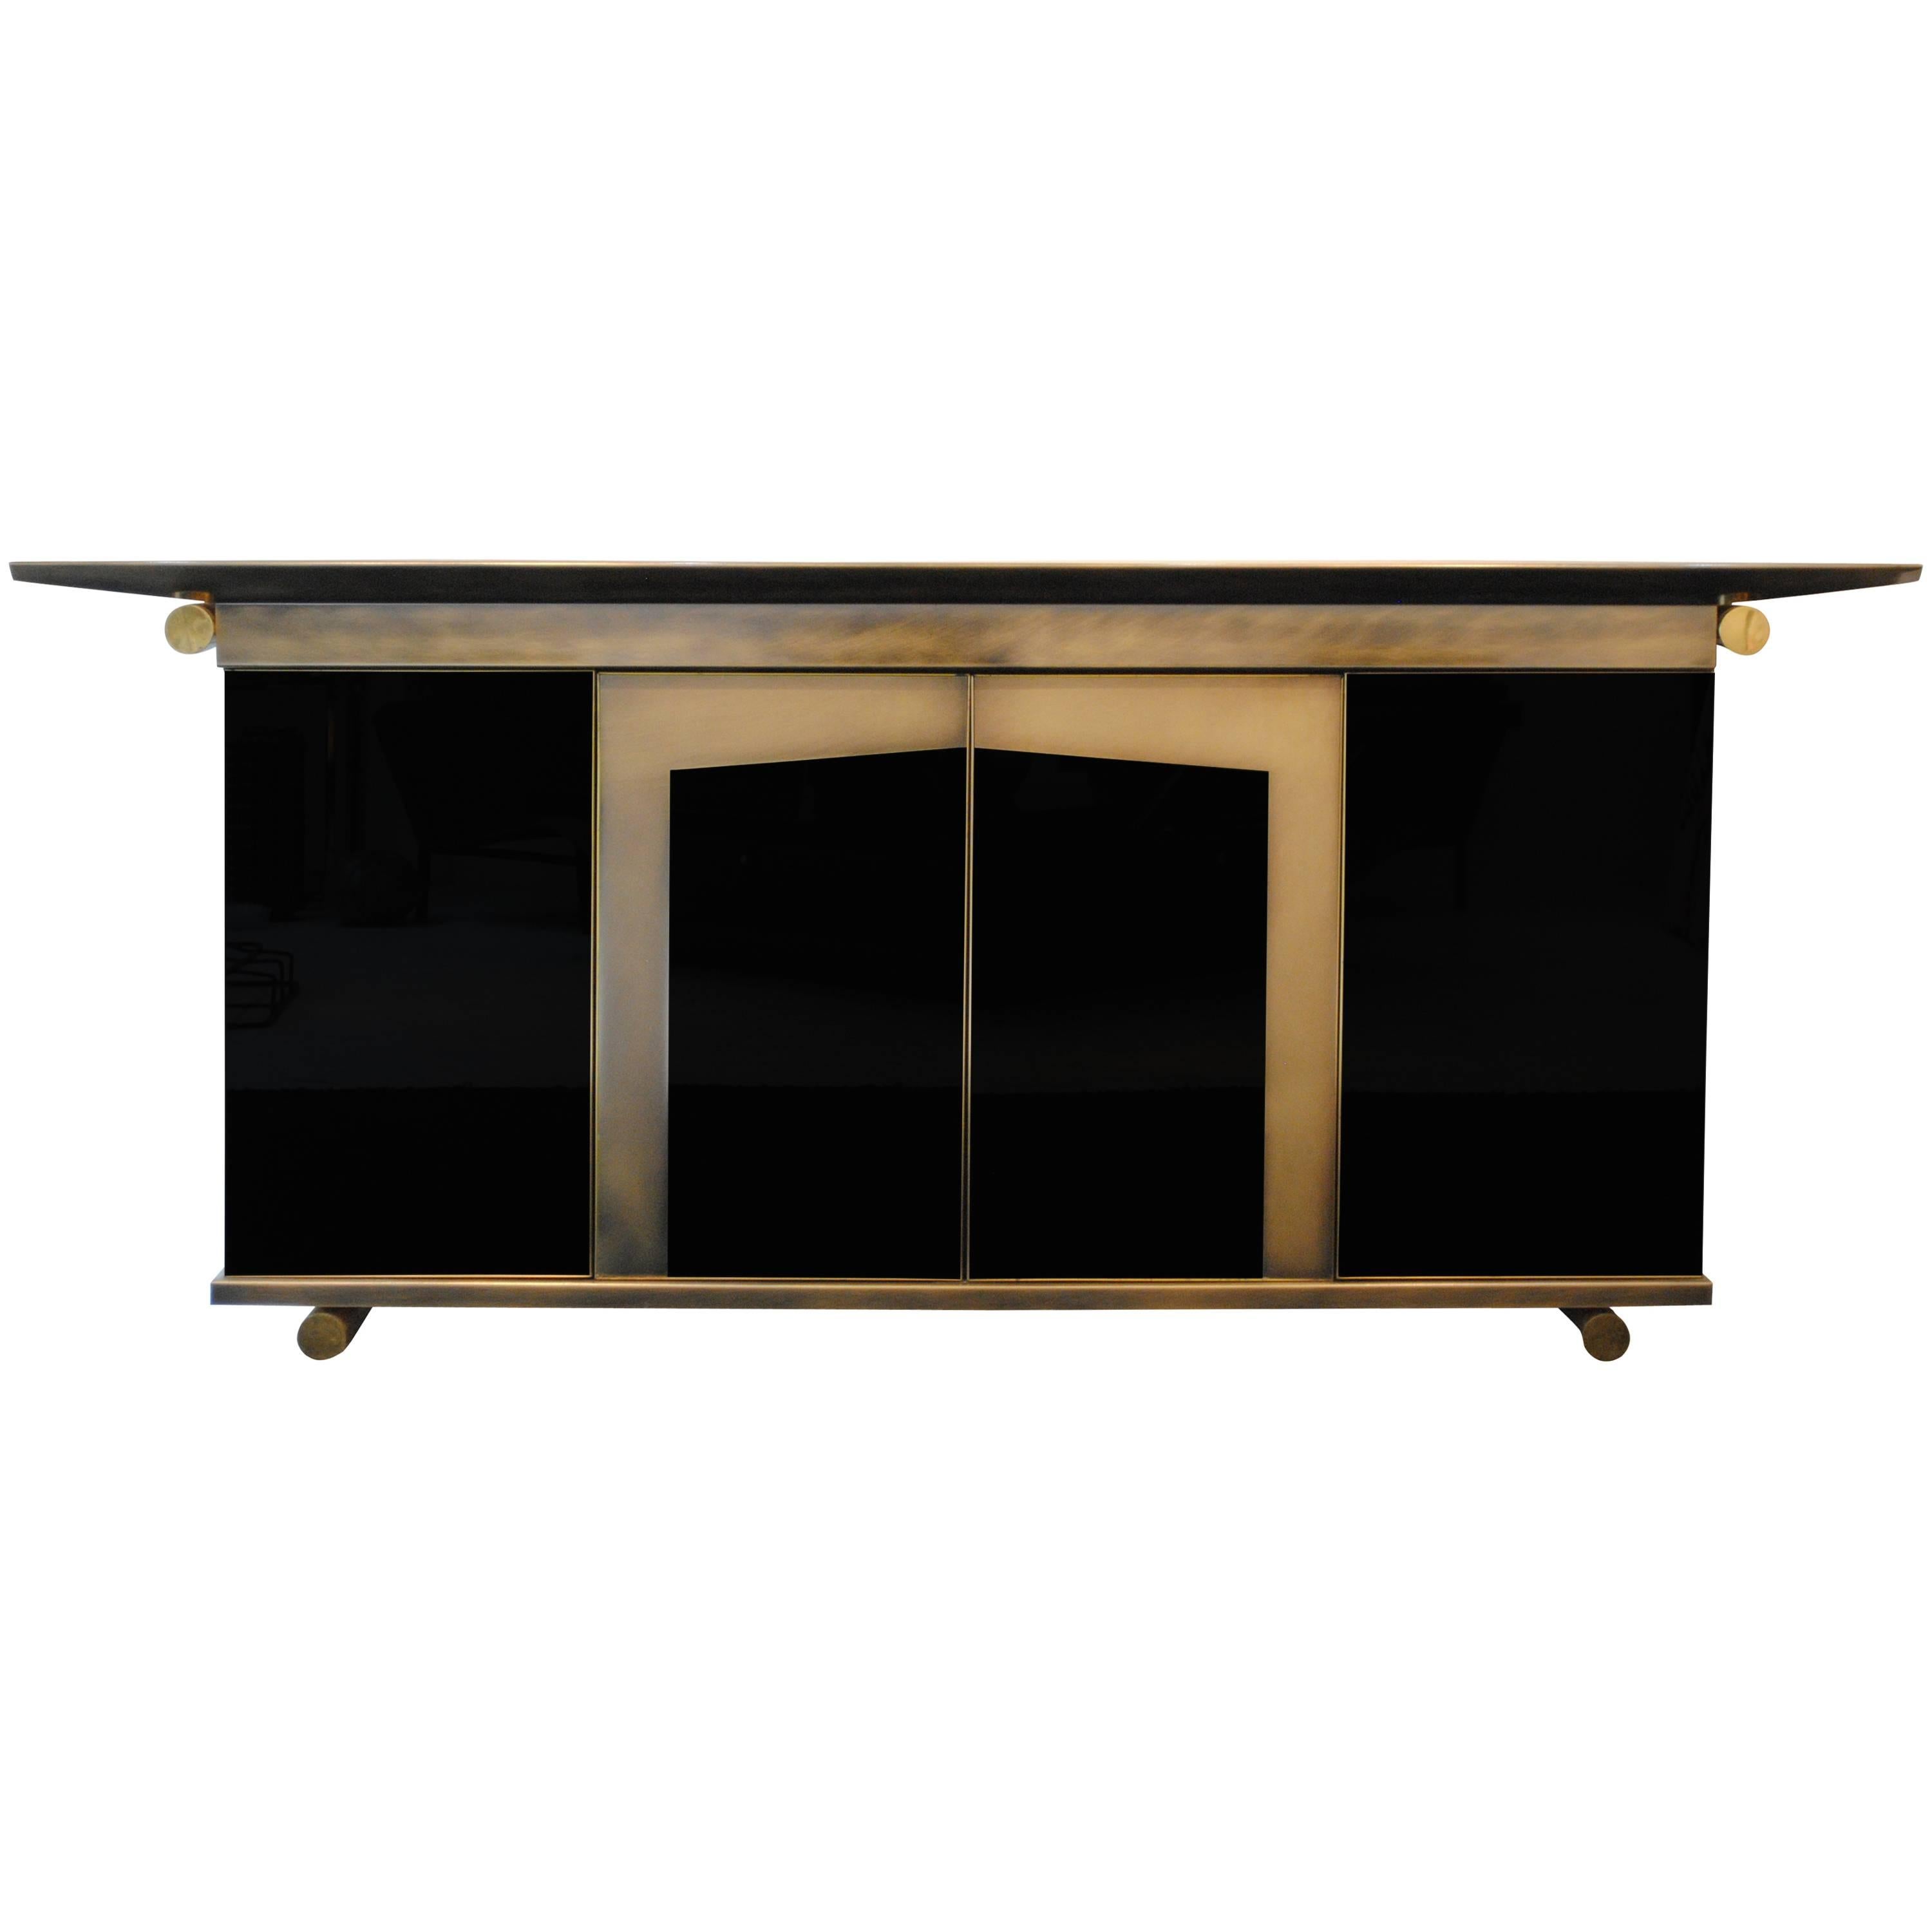 Important Steel, Brass and Glass Sideboard by Belgo Chrome, Belgium, 1970s